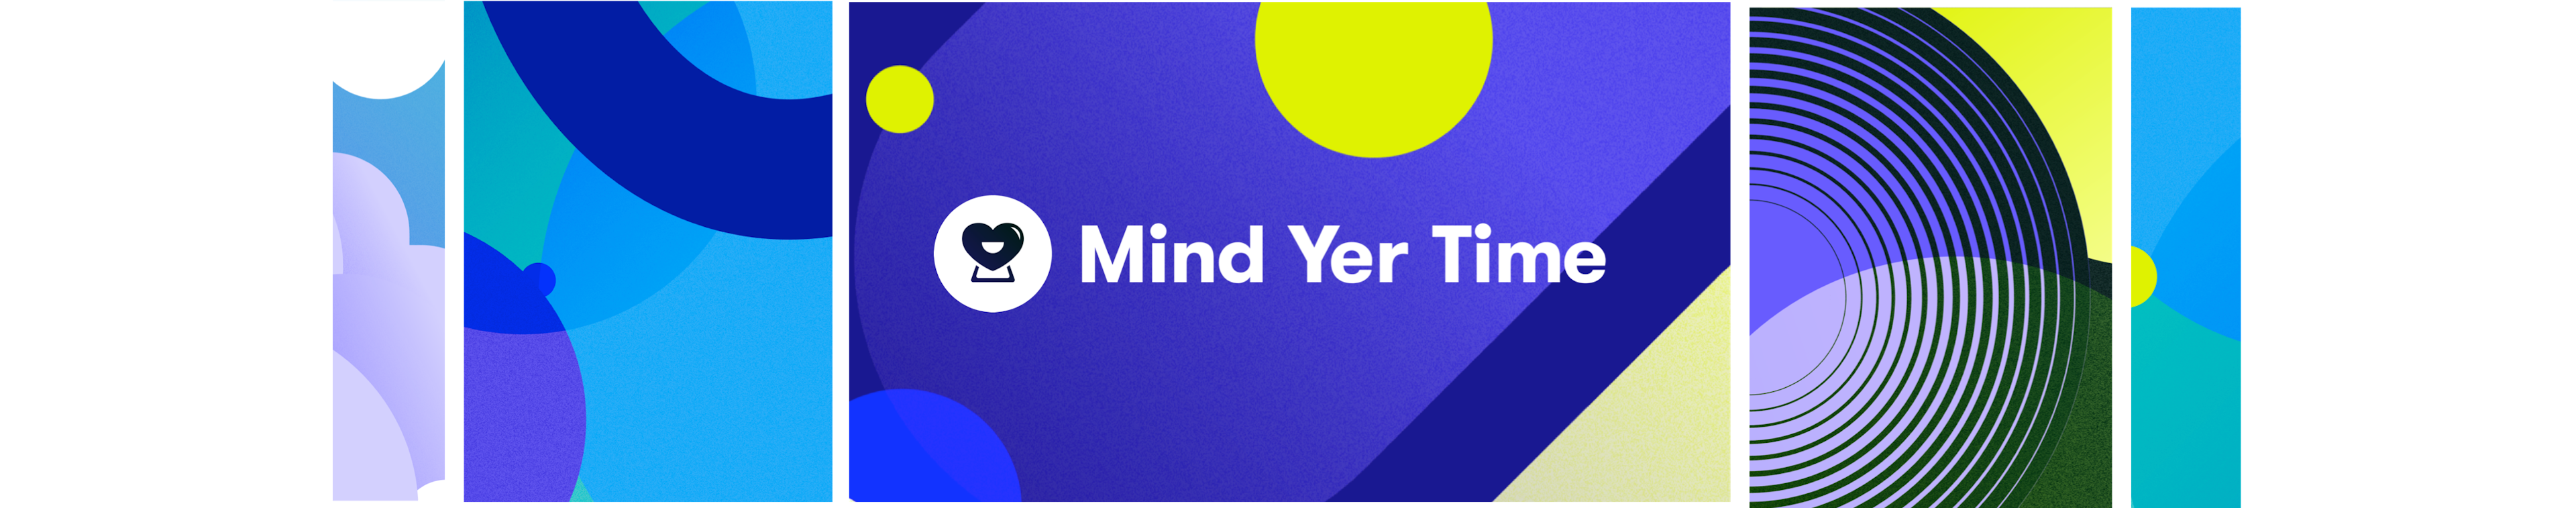 Branding featuring the logo for and text “Mind yer Time”